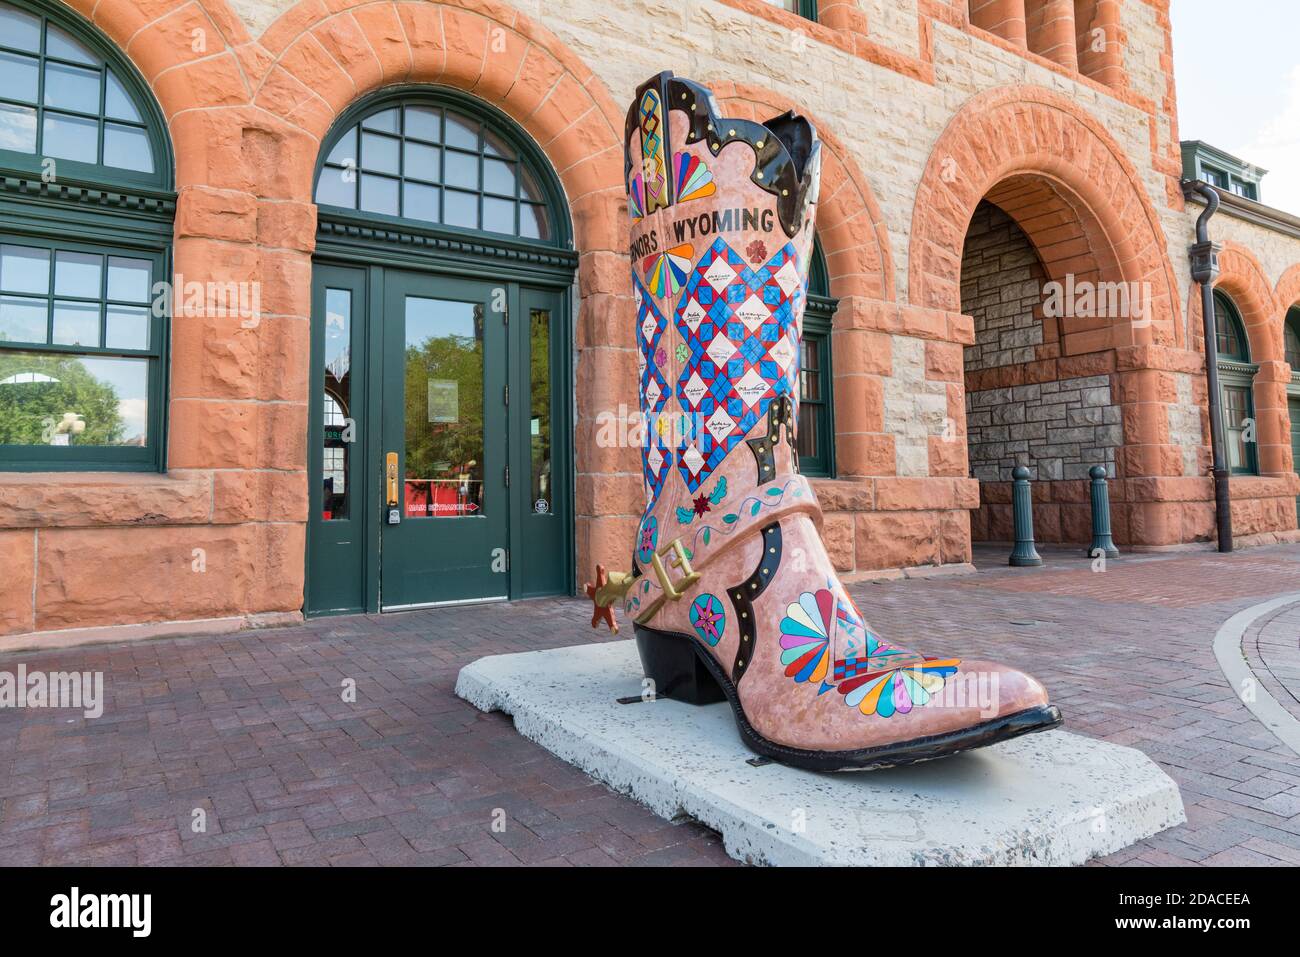 Cheyenne, WY - August 8, 2020: Large cowboy boot art sculpture outside of the historic Union Pacific Depot train station in Cheyenne, Wyoming Stock Photo